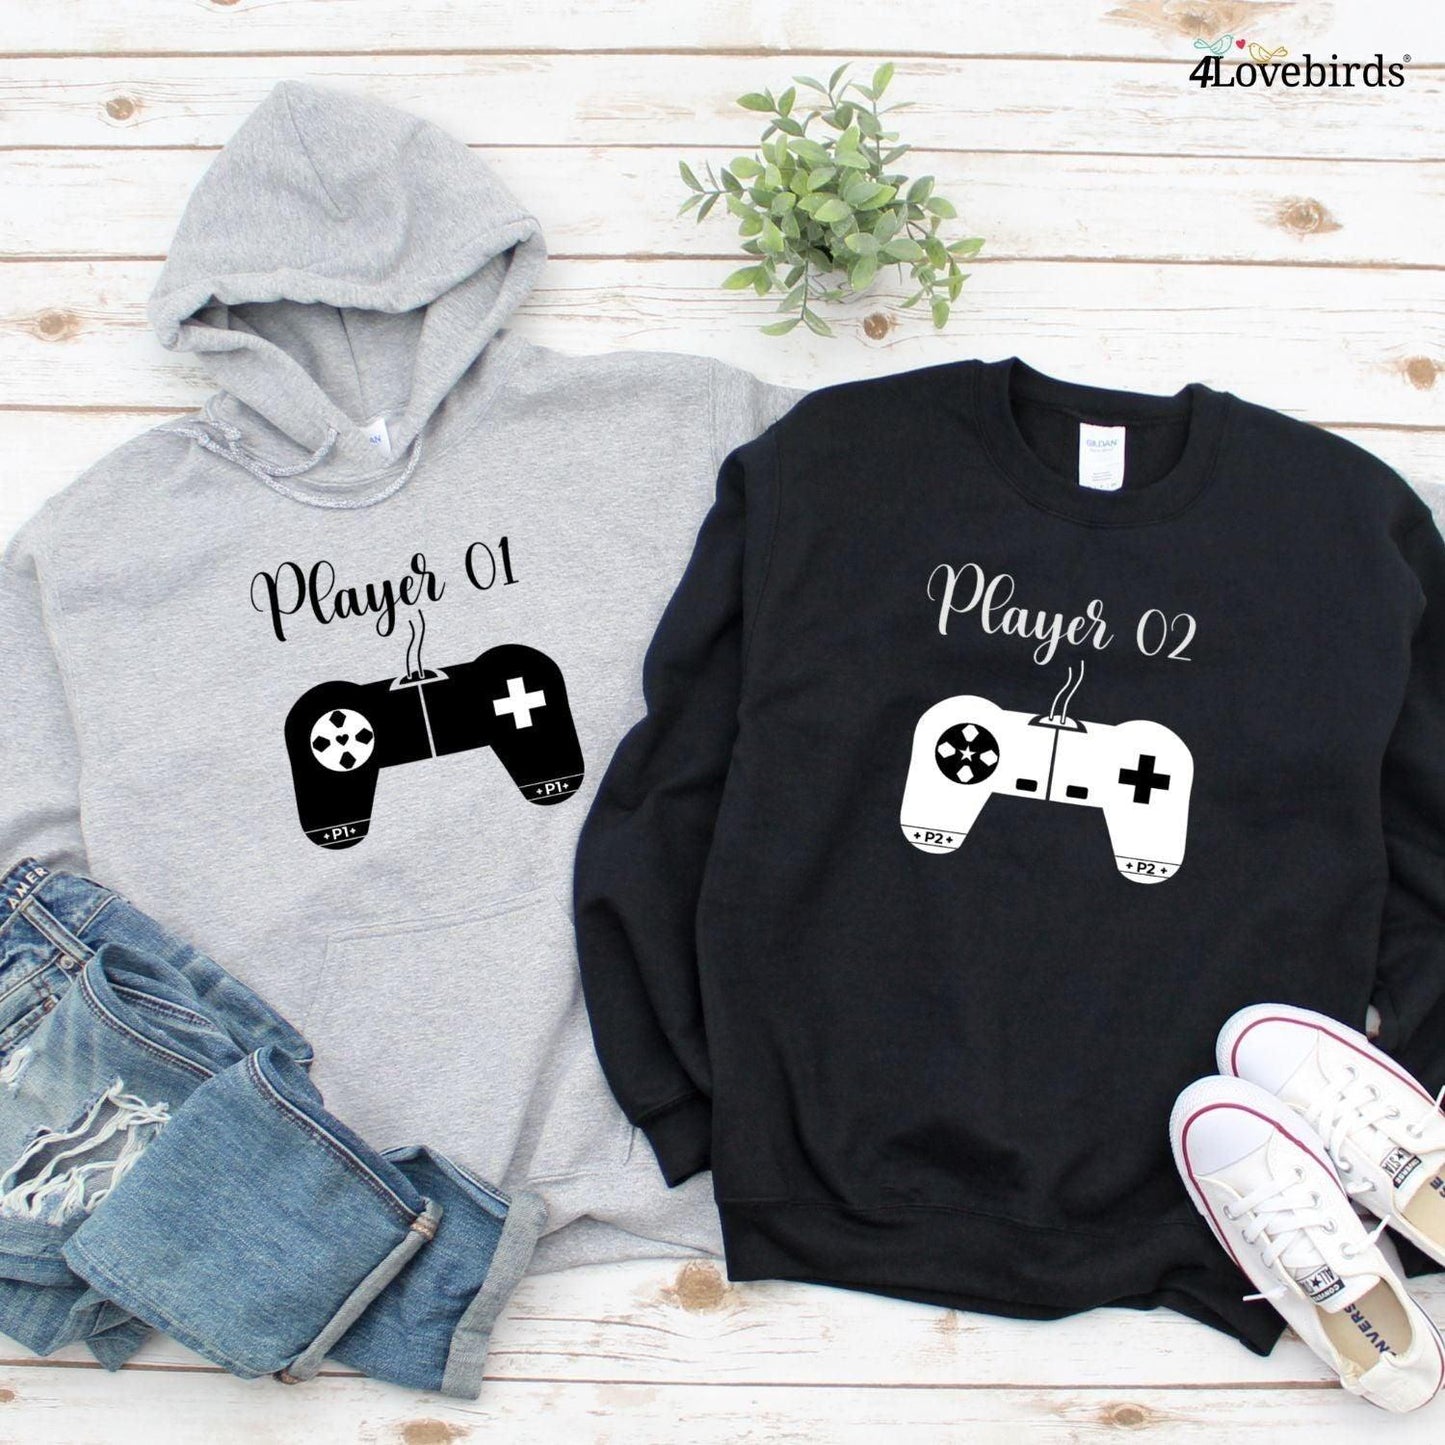 Gamer Couples Matching Set - Perfect for Couple Outfits! - 4Lovebirds